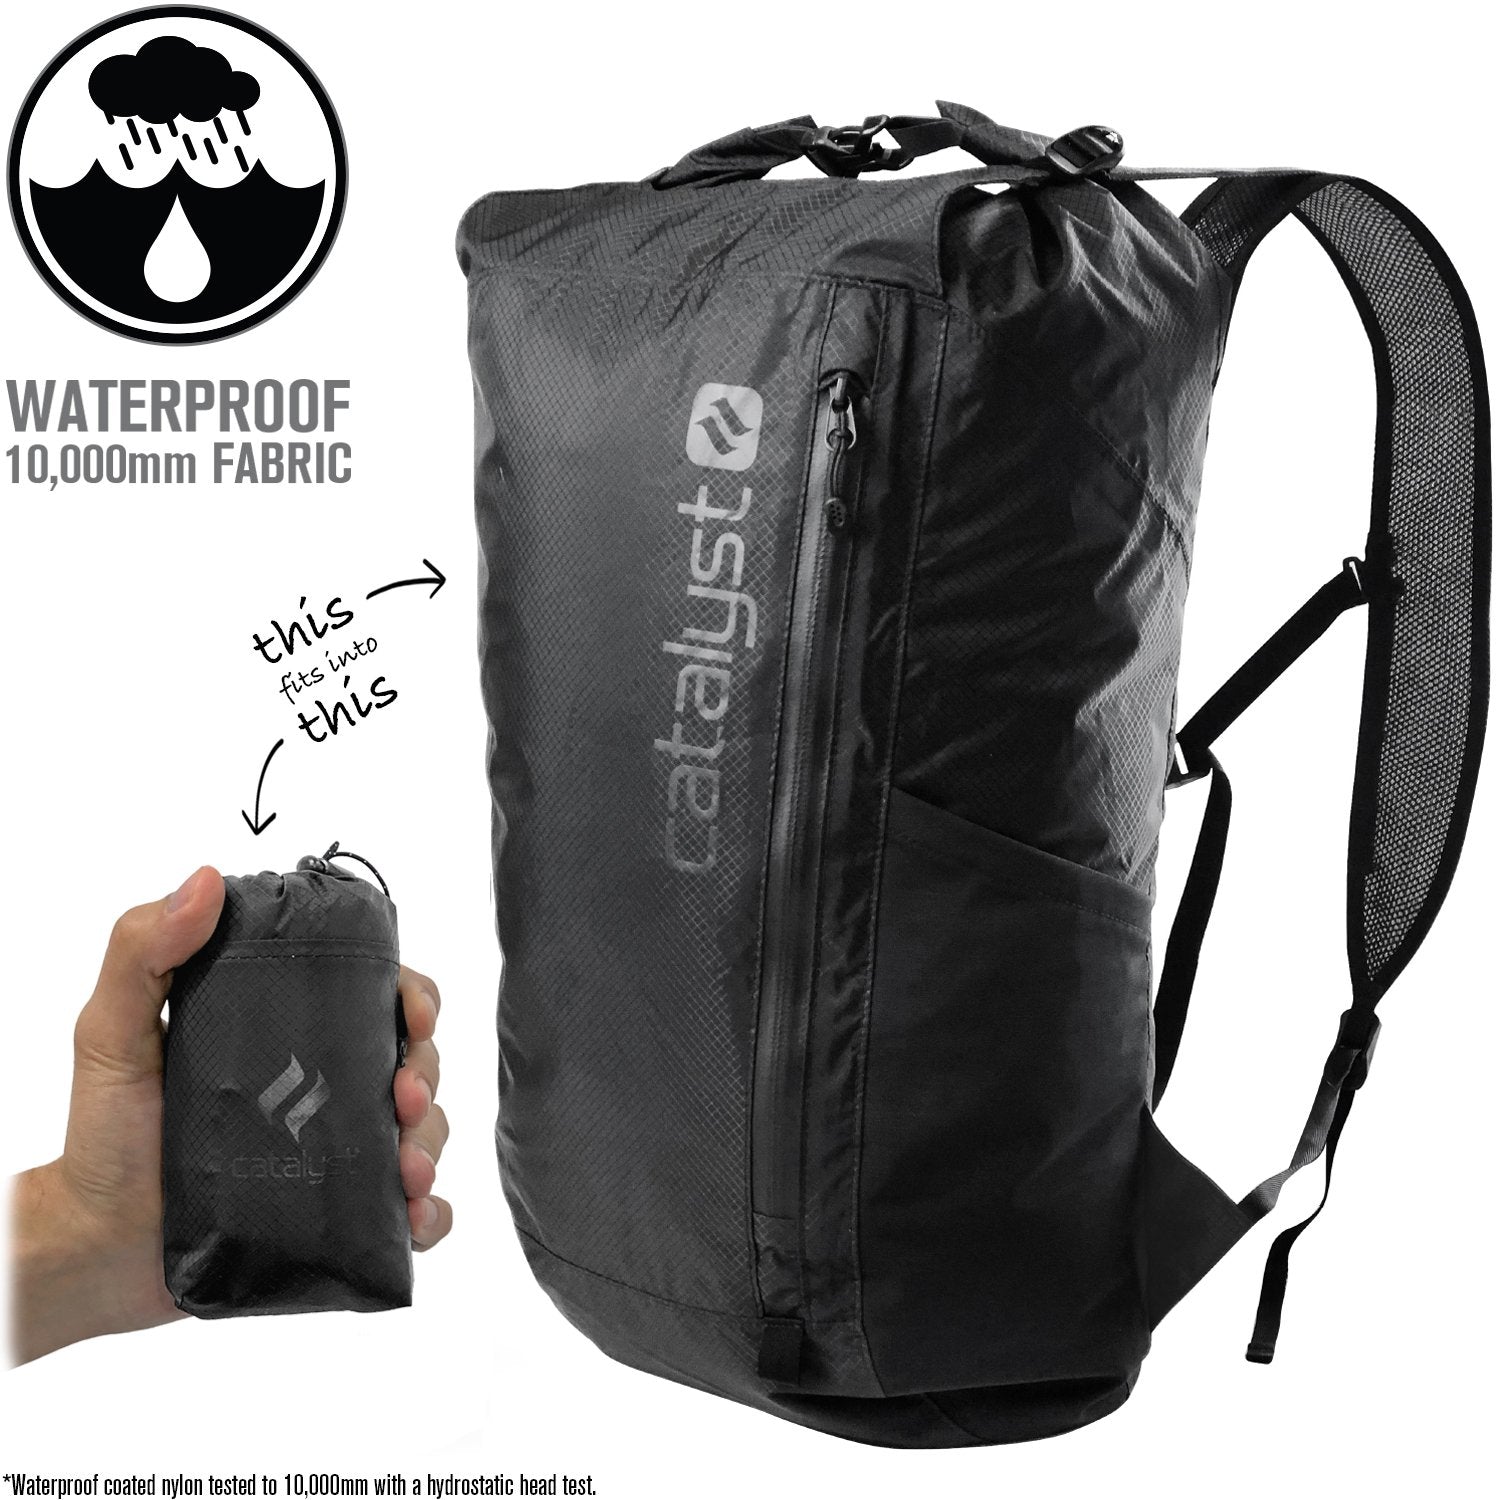 catalyst waterproof 20l backpack product itself hand holding the bag inside the compact carry pouch text reads waterproof 10,000mm fabric thisfits into this waterproof coated nylon tested to 10,000mm with a hydrostatic head test